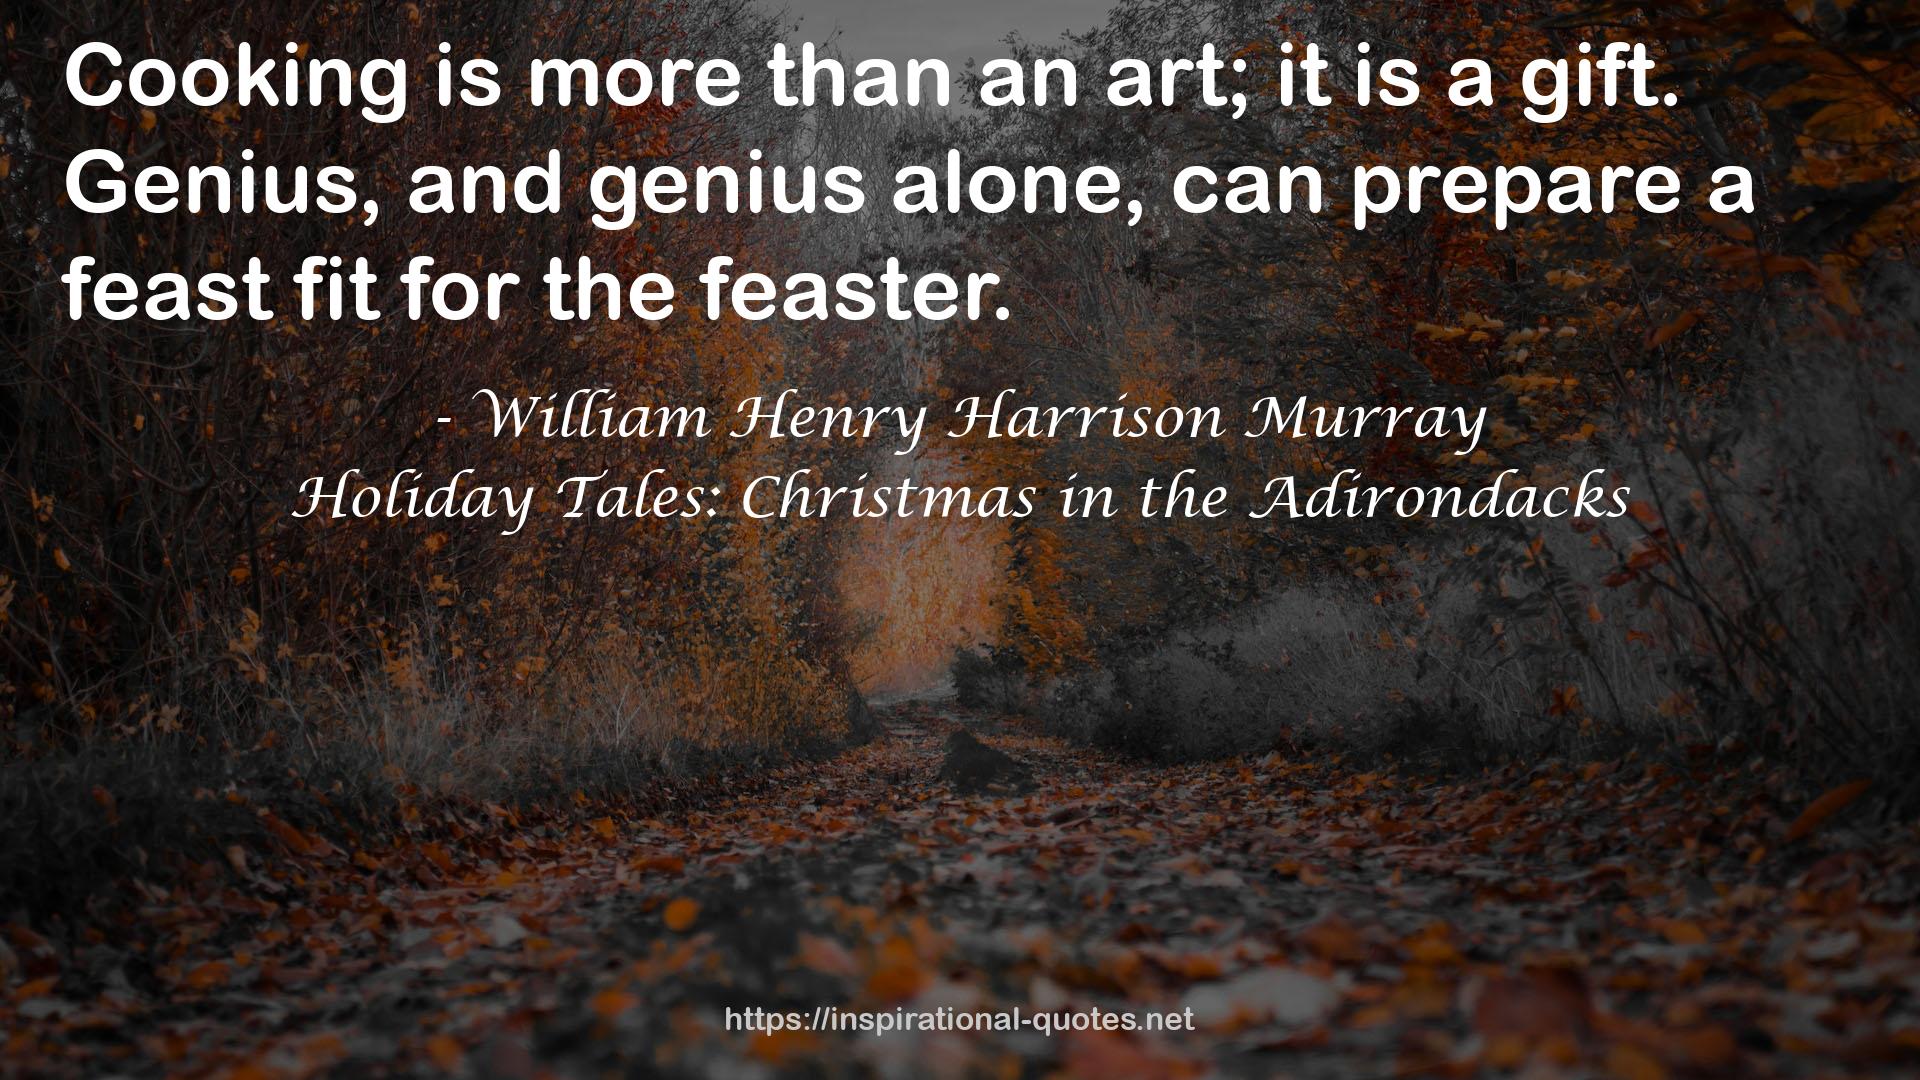 William Henry Harrison Murray QUOTES